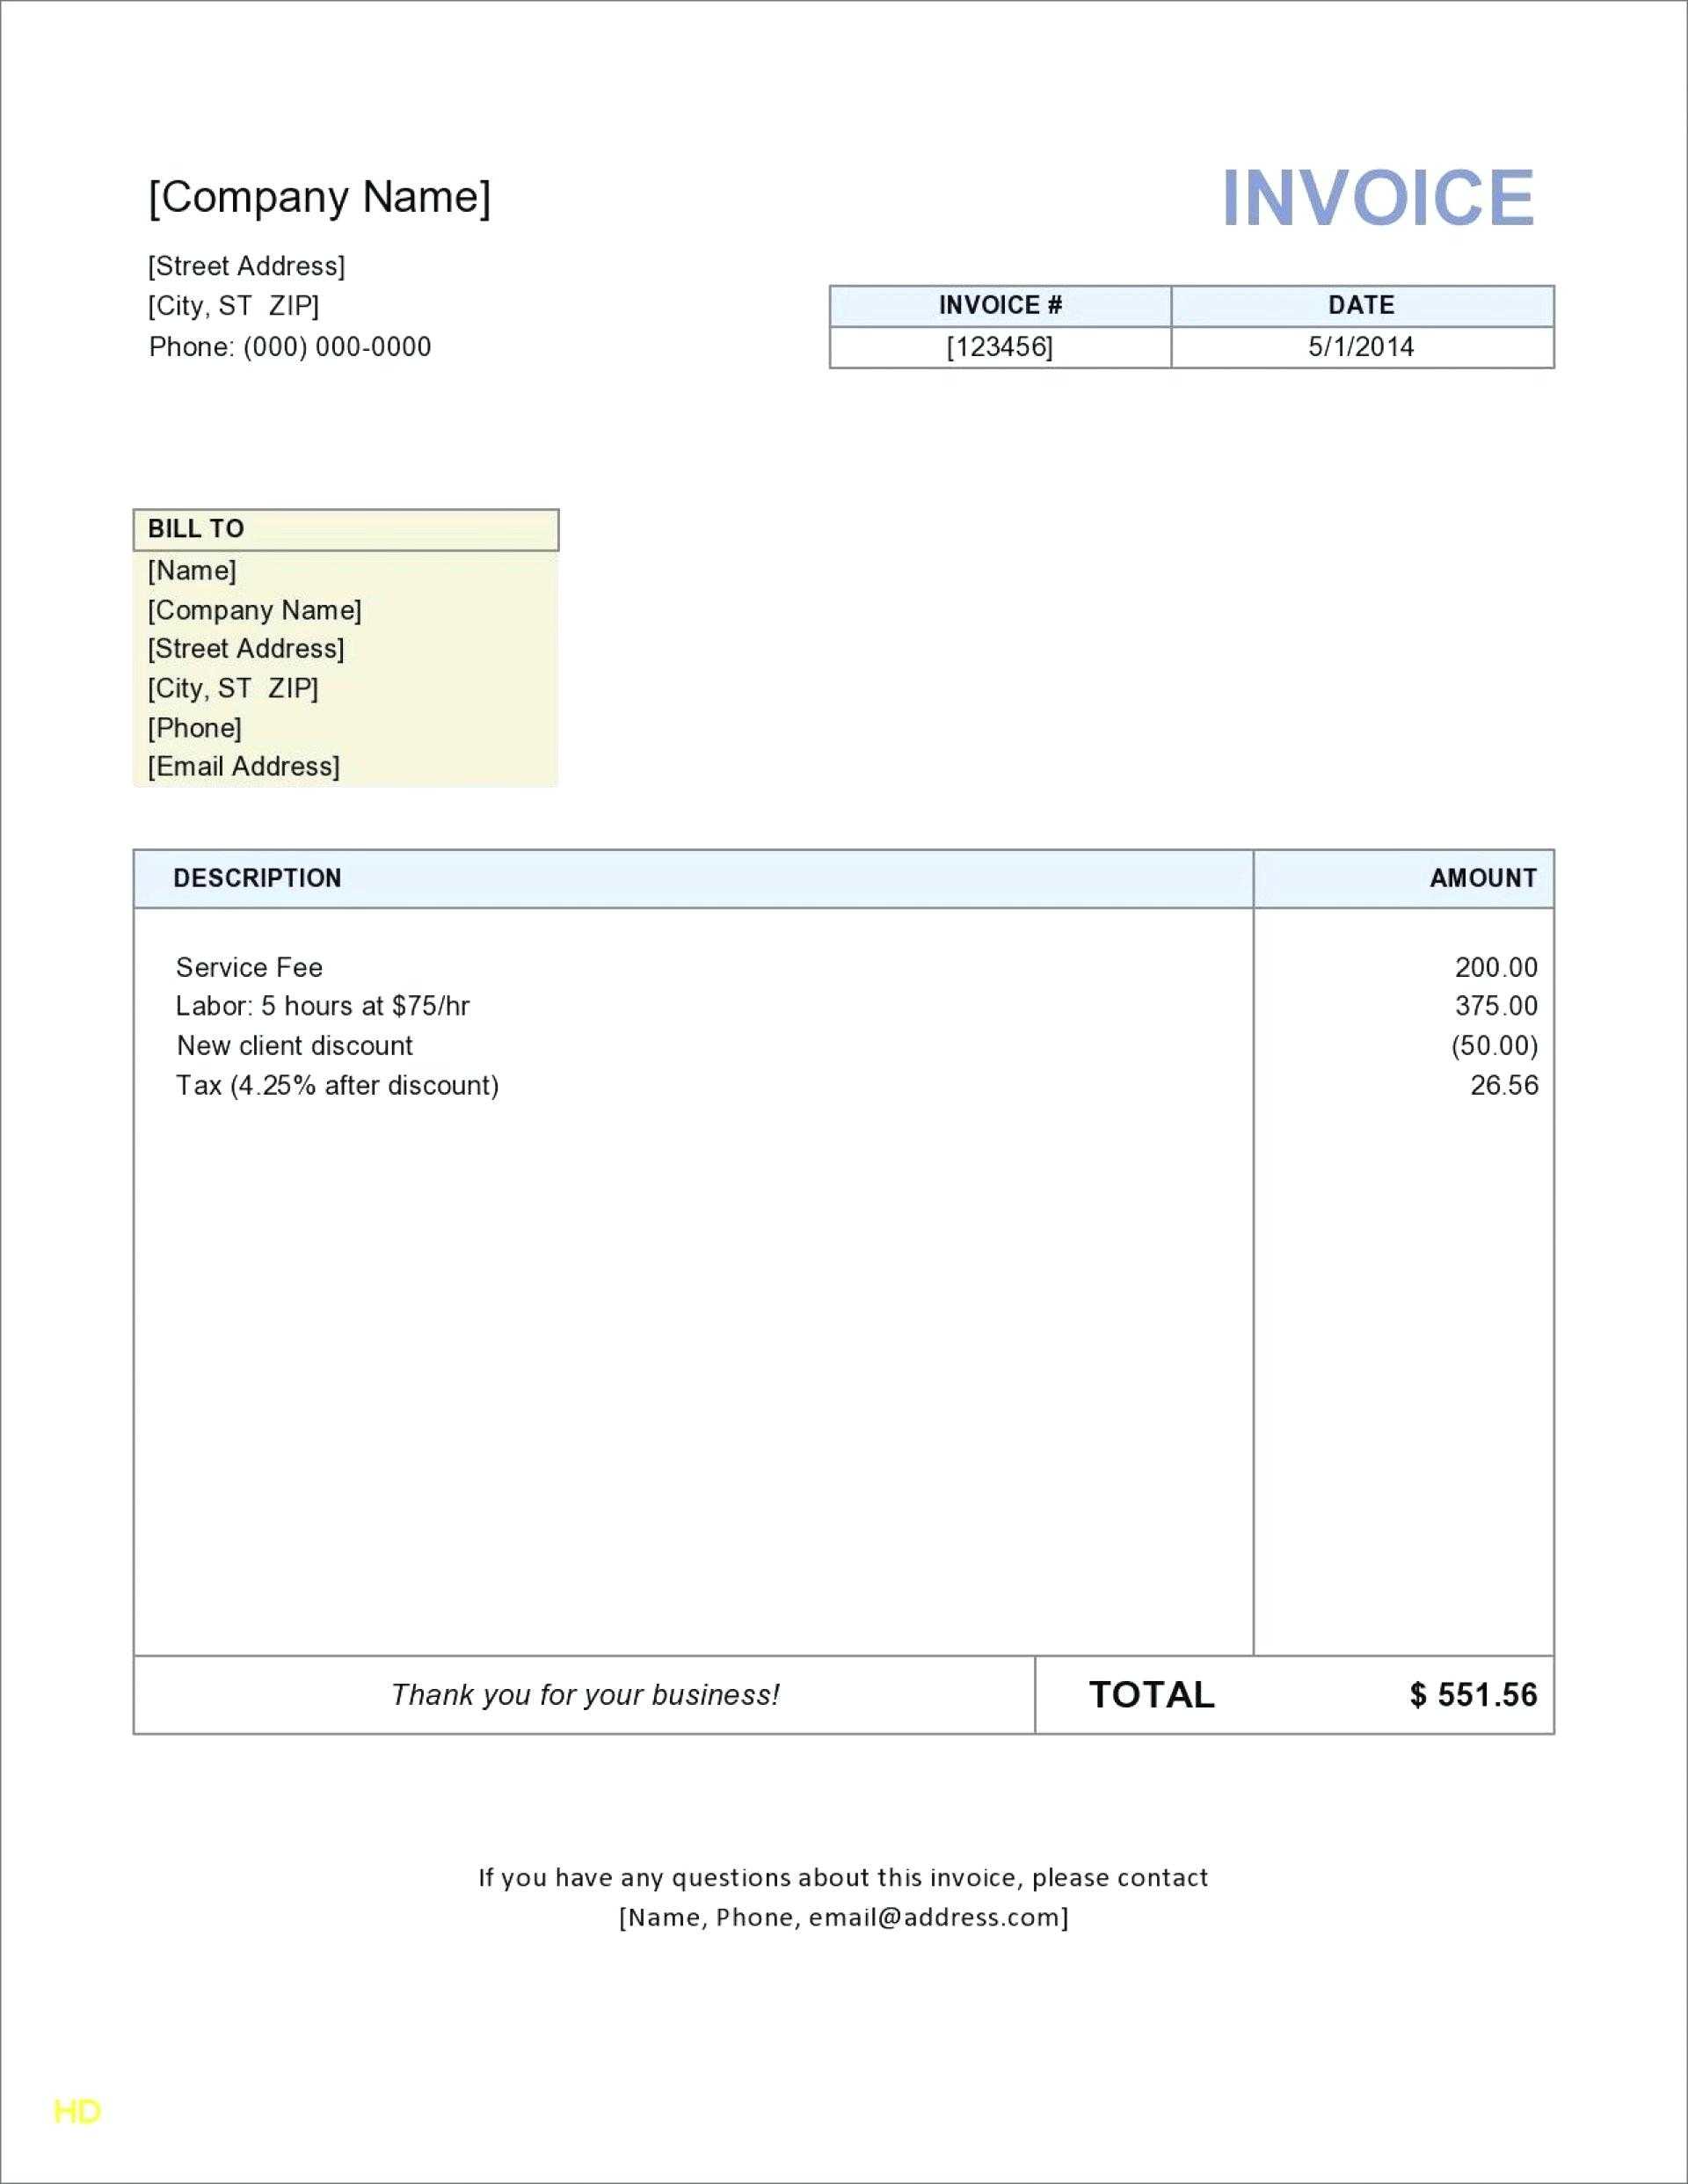 Microsoft Invoice Template 2010 – Mahre.horizonconsulting.co In Invoice Template Word 2010